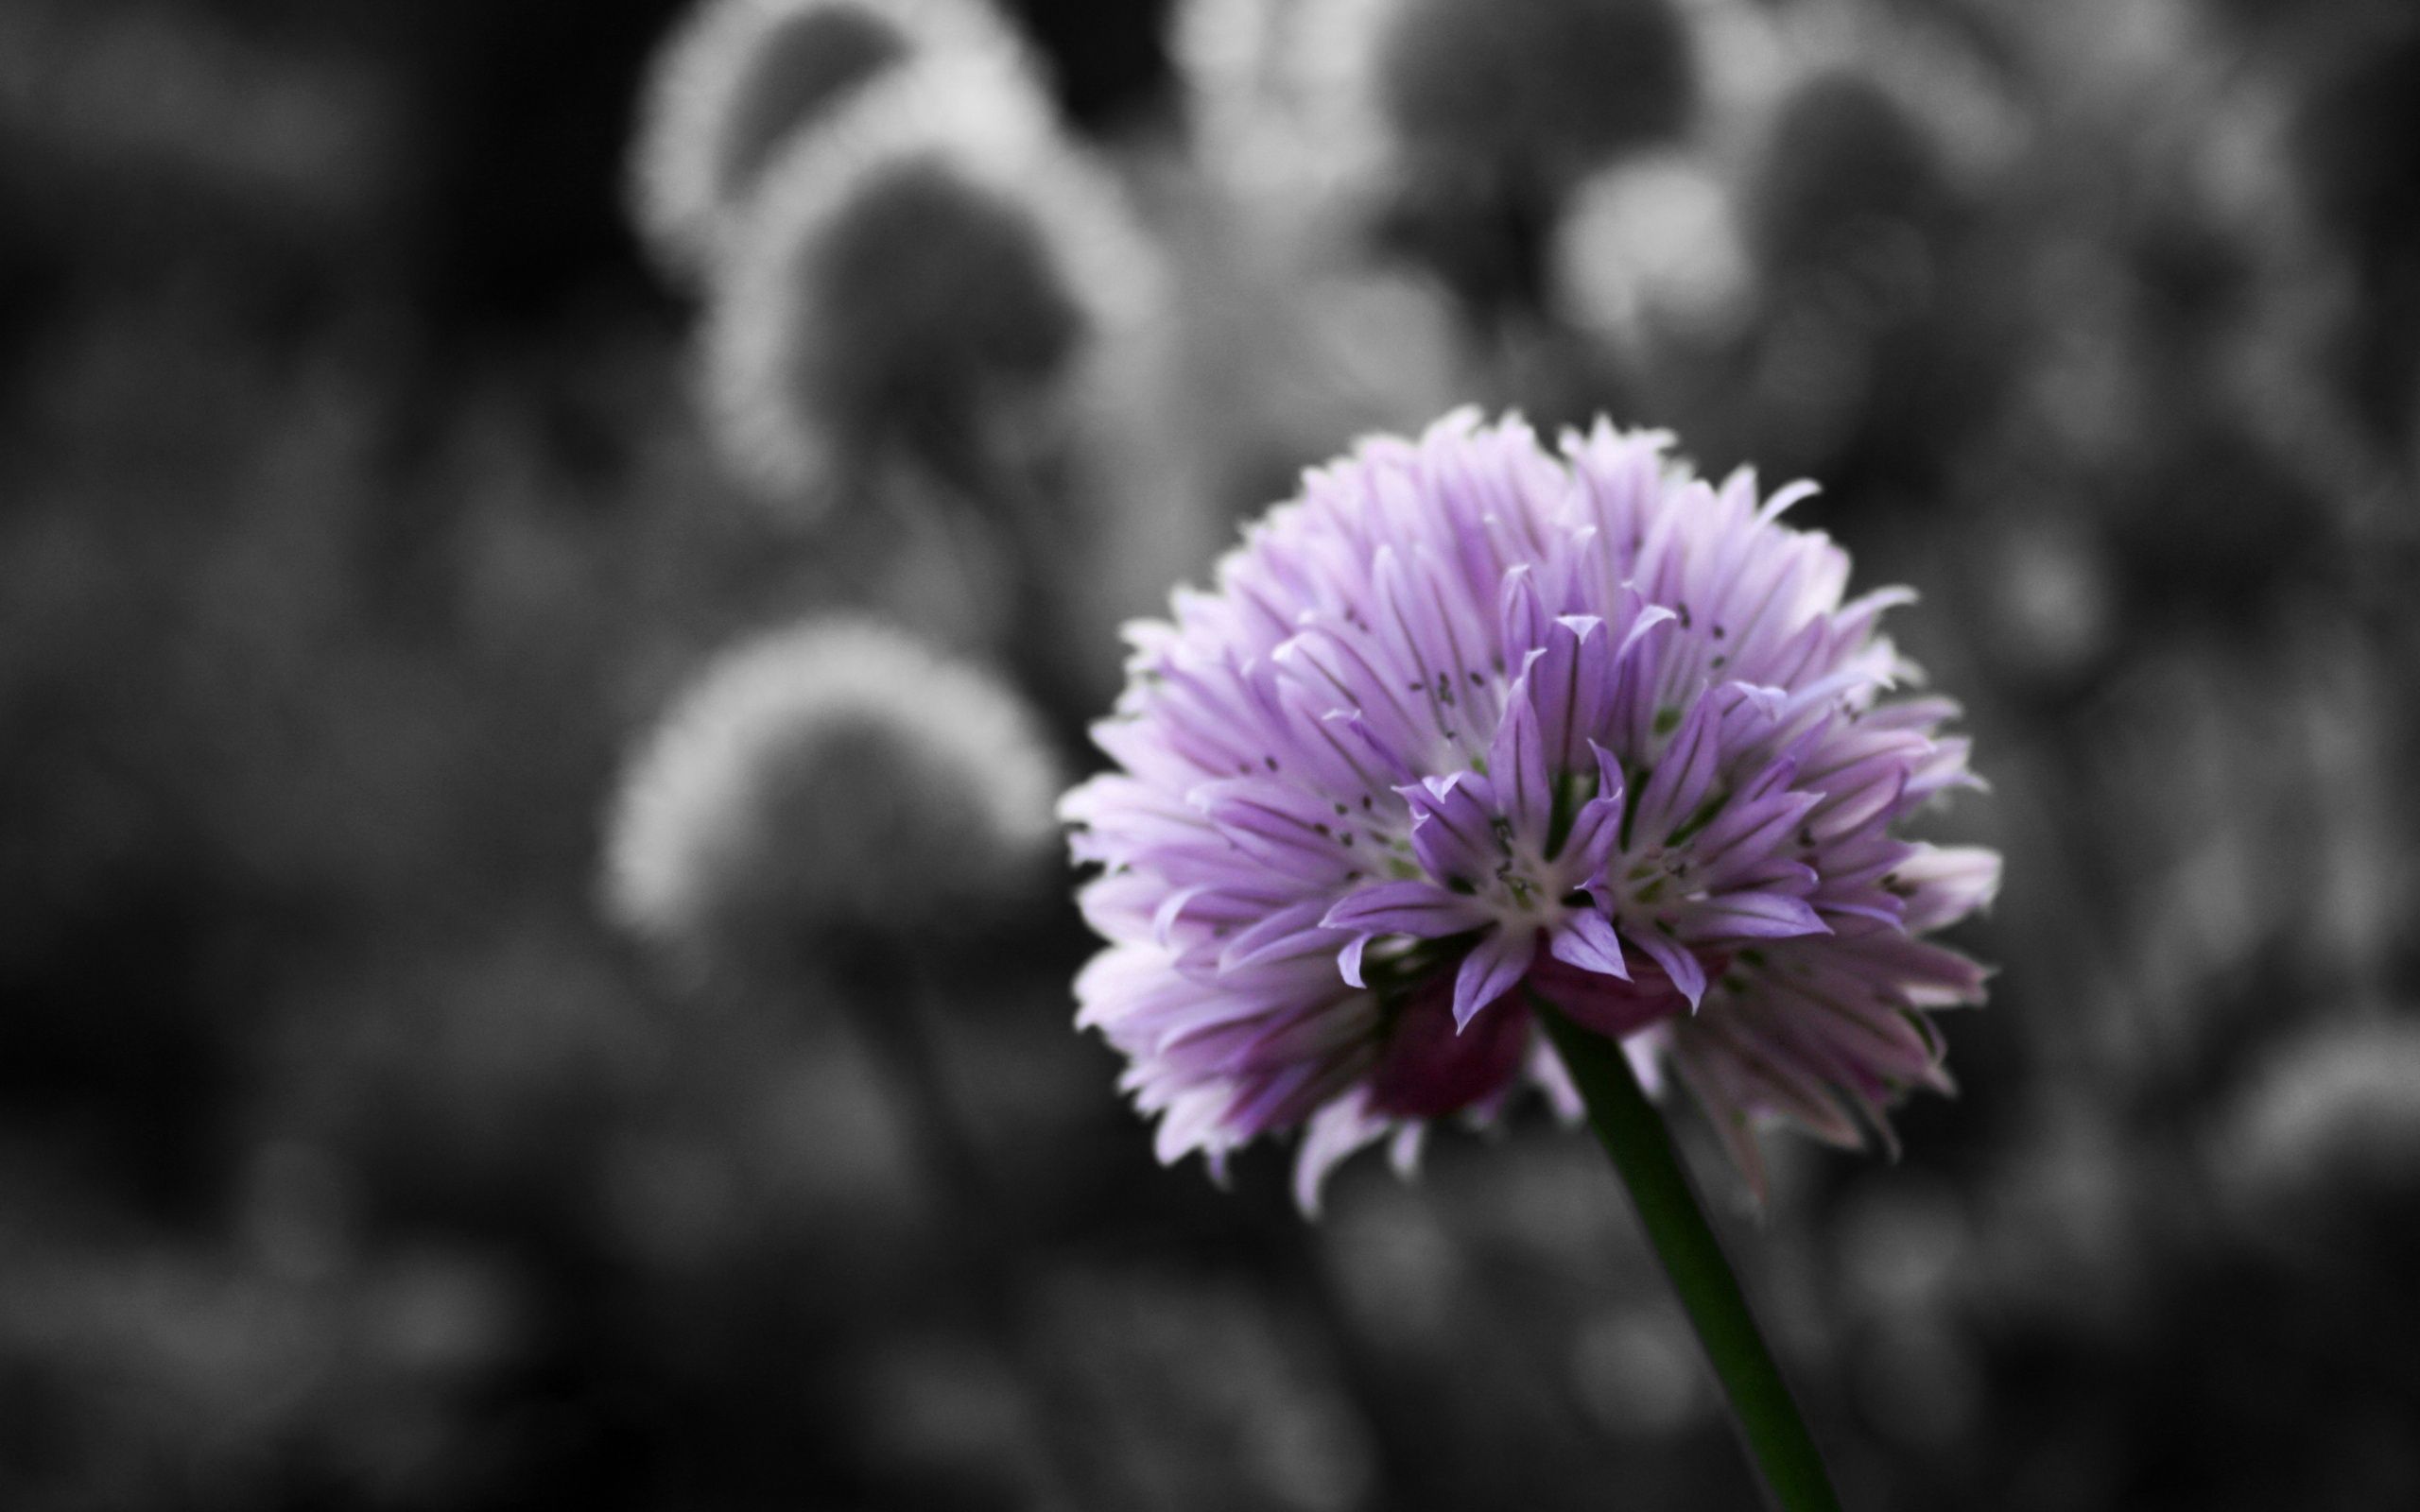 55763 download wallpaper flowers, grass, plant, macro, clover screensavers and pictures for free